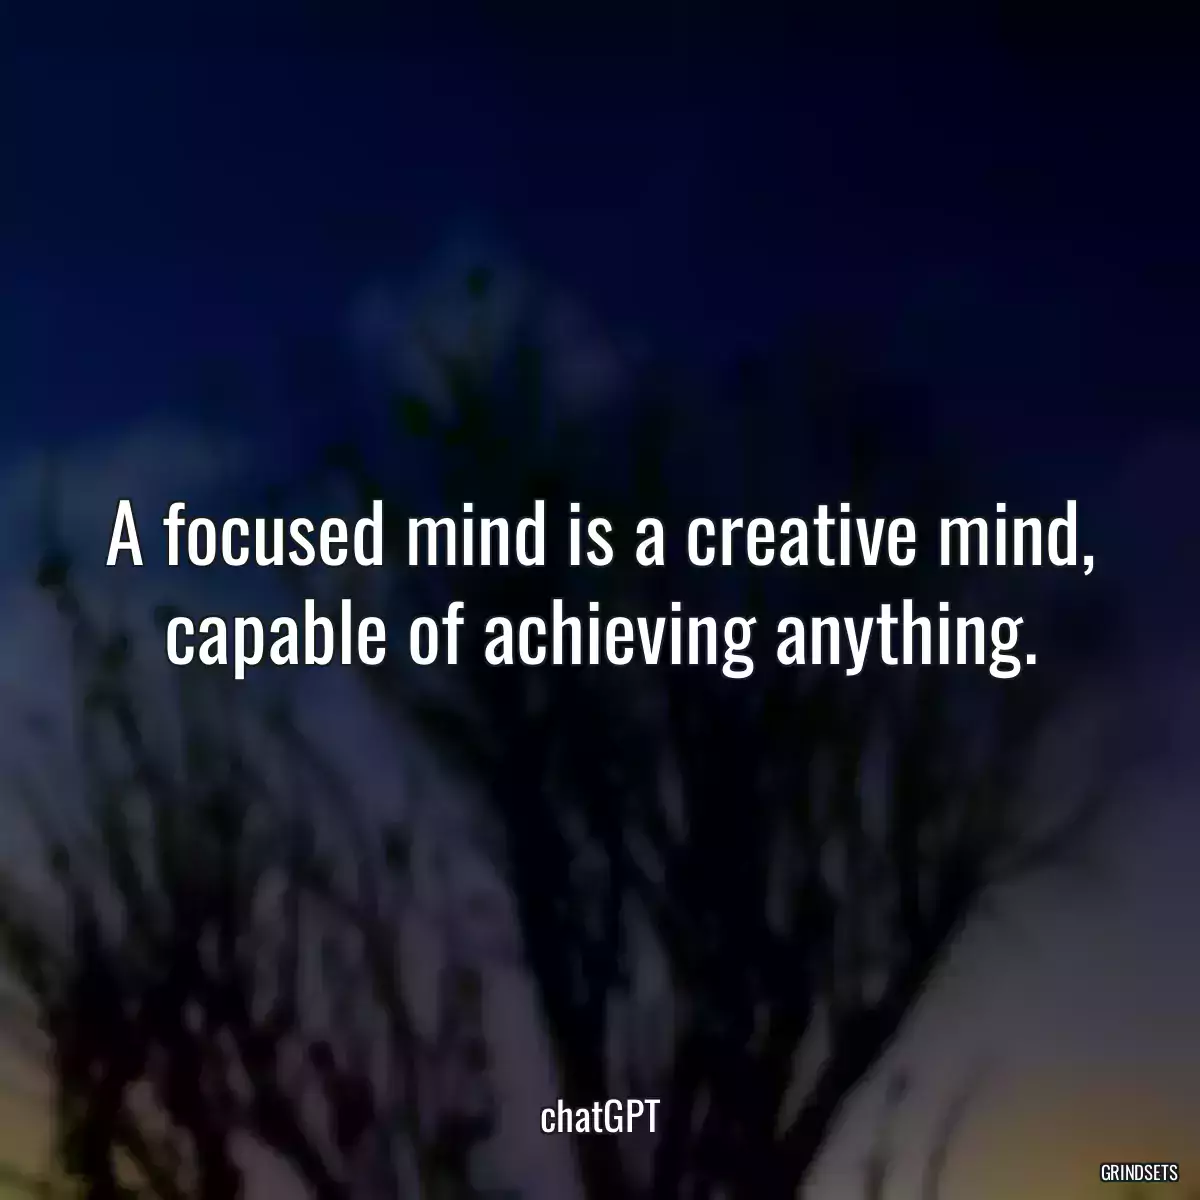 A focused mind is a creative mind, capable of achieving anything.